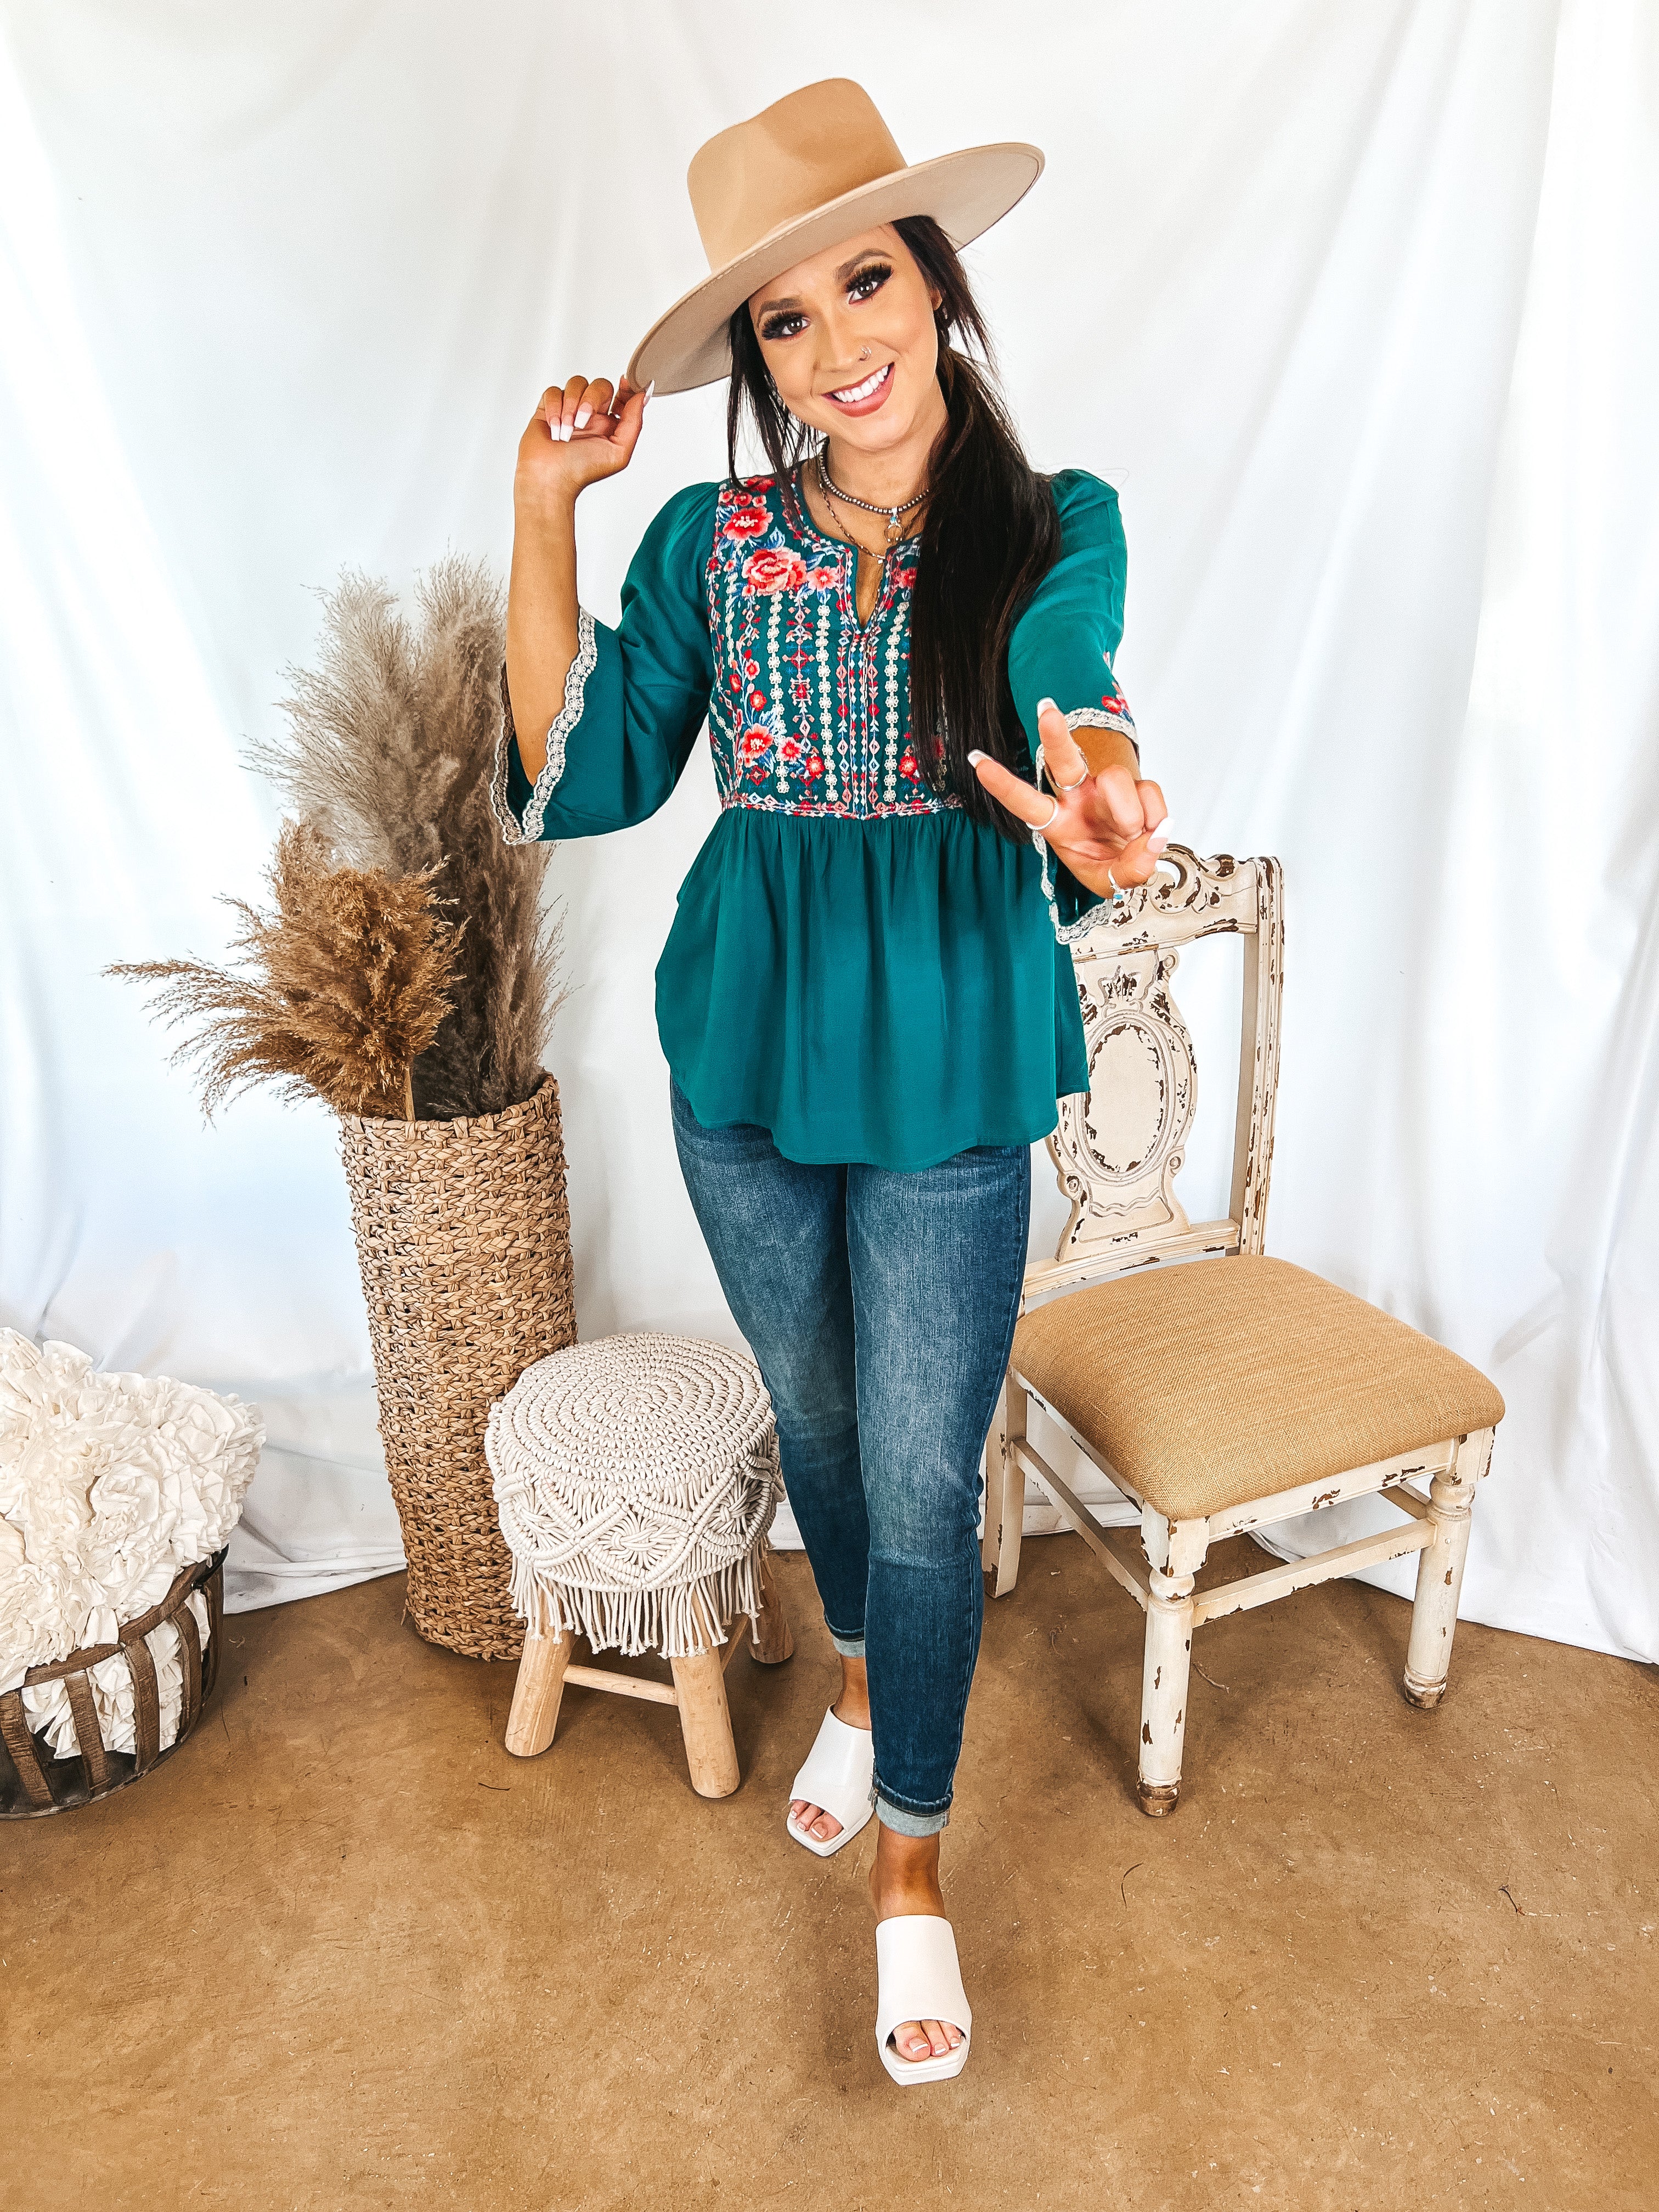 Already Mine 3/4 Bell Sleeve Embroidered Babydoll Top in Teal - Giddy Up Glamour Boutique